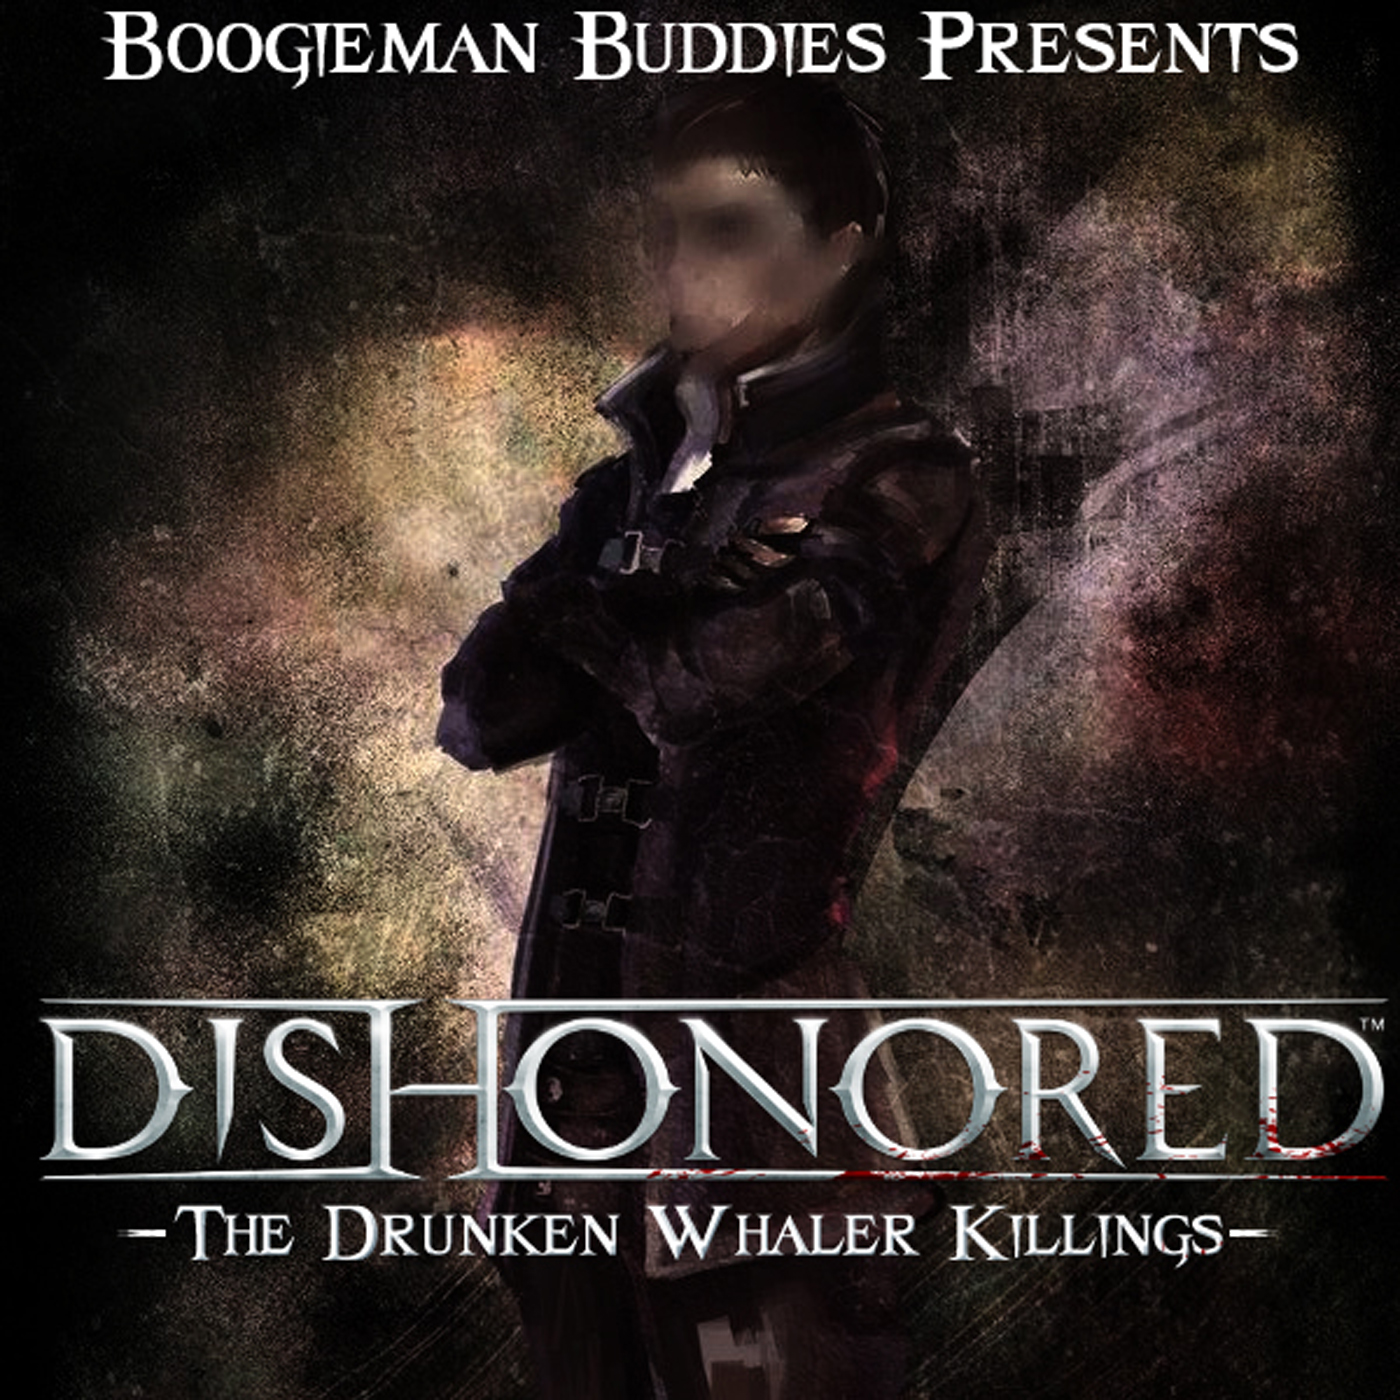 Dishonored: The Drunken Whaler Killings Session 1 - What Will We Do With the Drunken Whaler